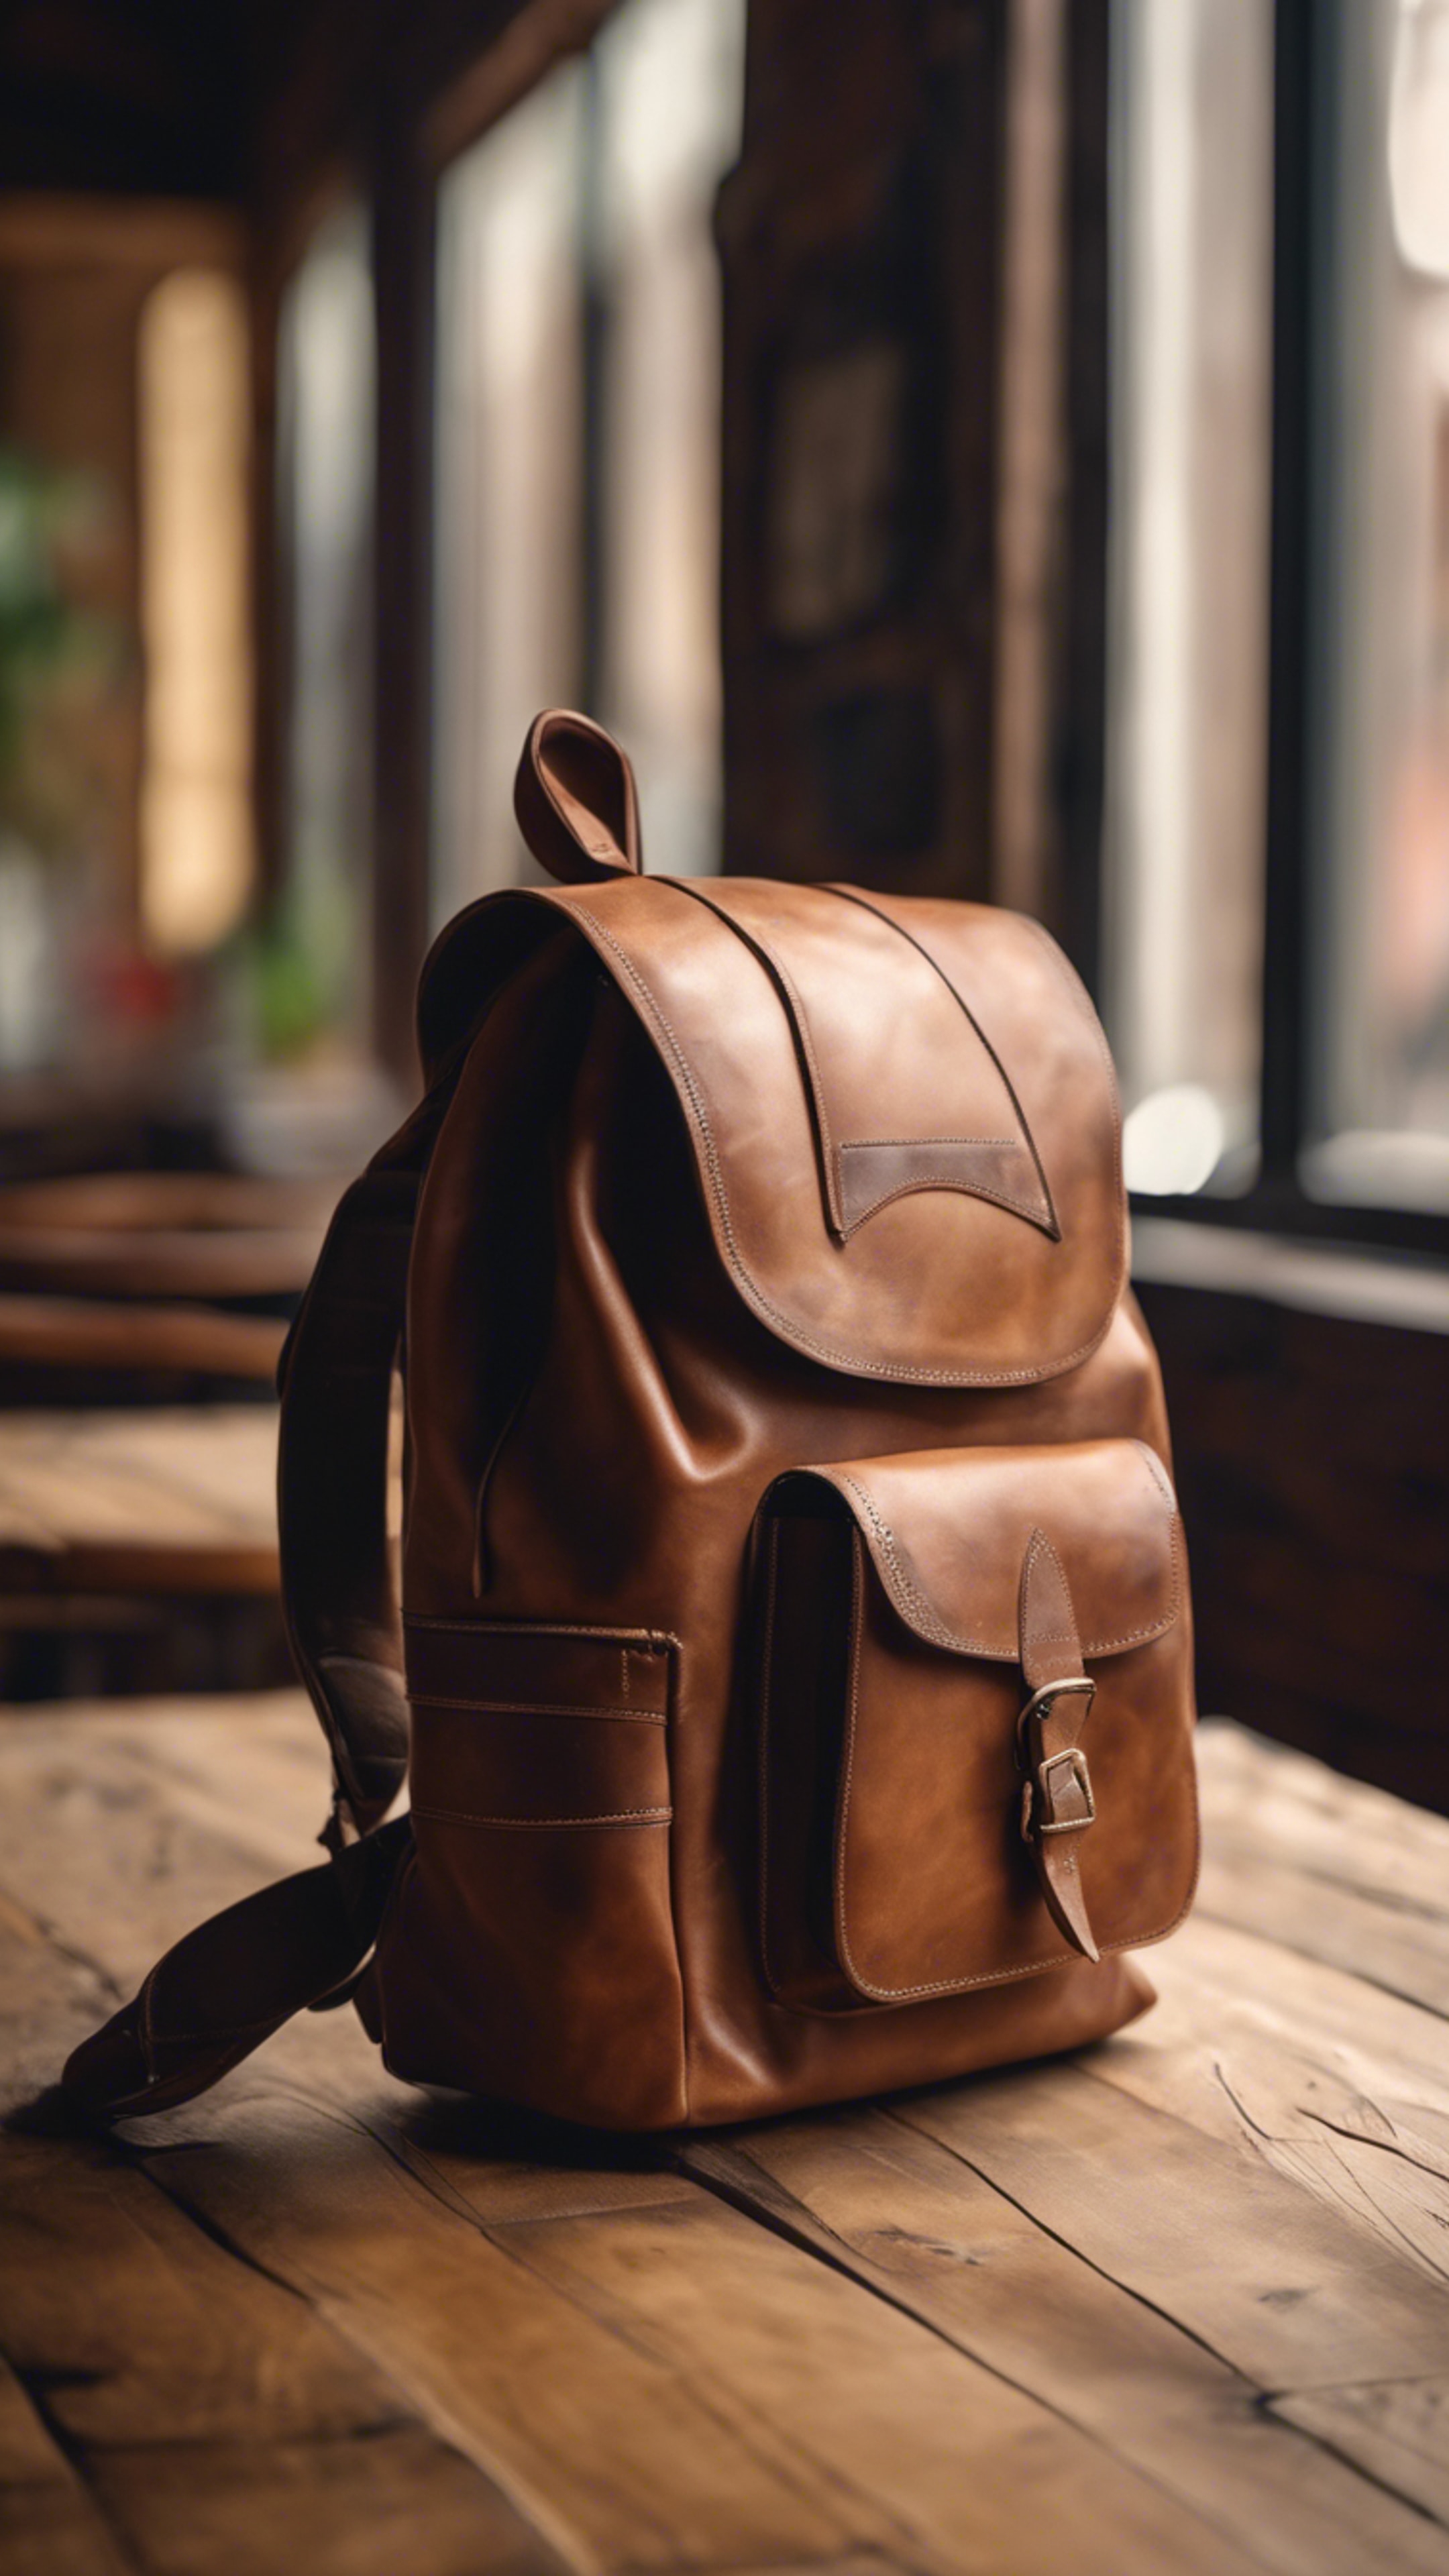 A vintage brown leather backpack sitting on a wooden table in a cozy café. Papel de parede[7ce12483b5e34217b072]